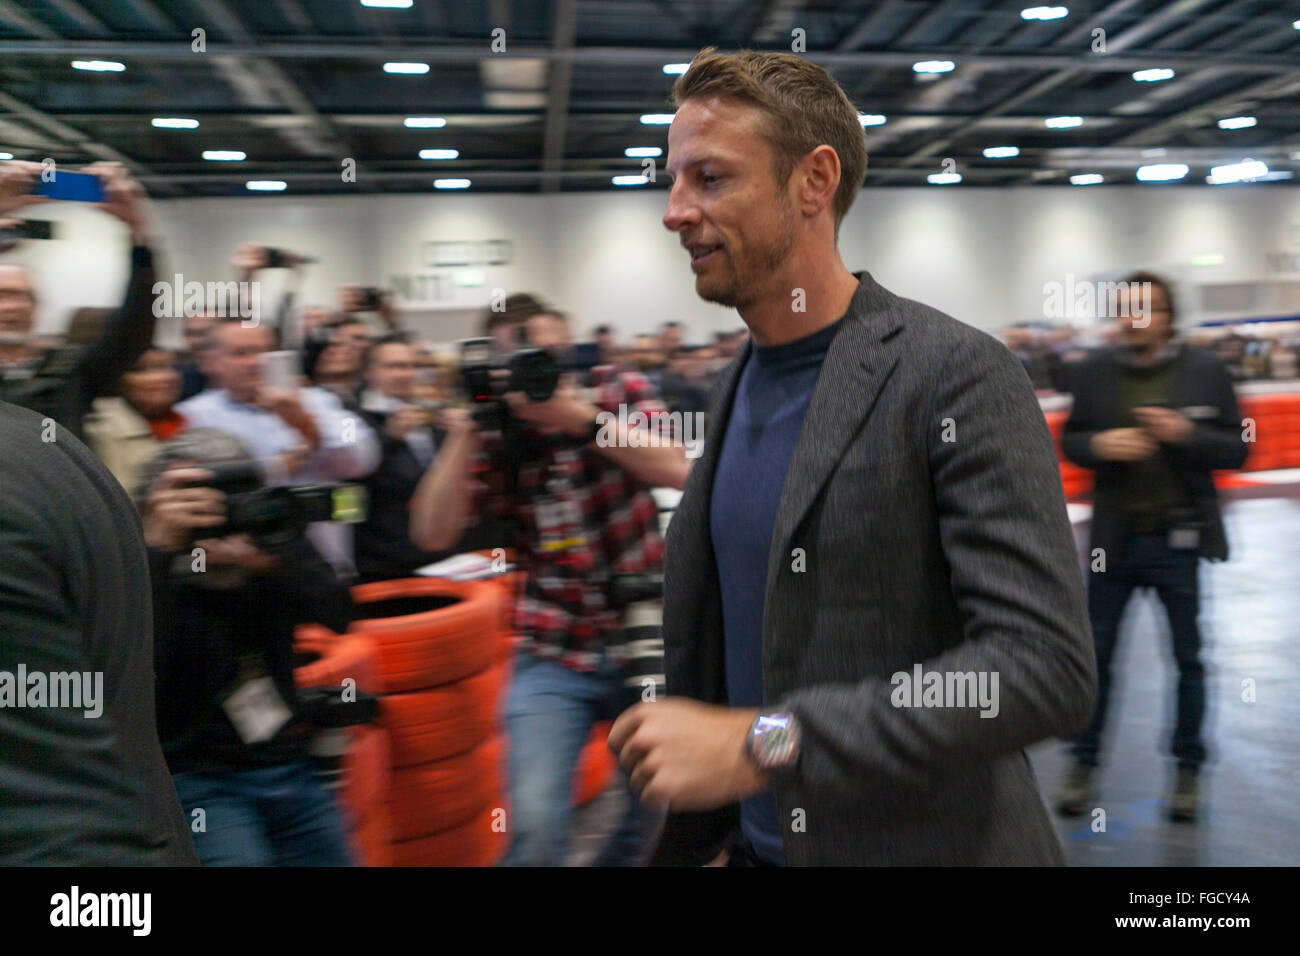 London, UK. 18th February, 2016. Jenson Button is breaking off from his busy preparations for the forthcoming grand prix season to attend the opening night of the London Classic Car Show (18-21 February) at Excel in London’s Docklands. The 2009 Formula One World Champion joins host BBC F1 presenter Suzi Perry, plus top guests from the motor sport and classic car worlds.   The star-studded Preview Evening starts a four-day Great Debate to determine ‘which nation has produced the world’s best cars’. Credit:  Bluefly/Alamy Live News Stock Photo